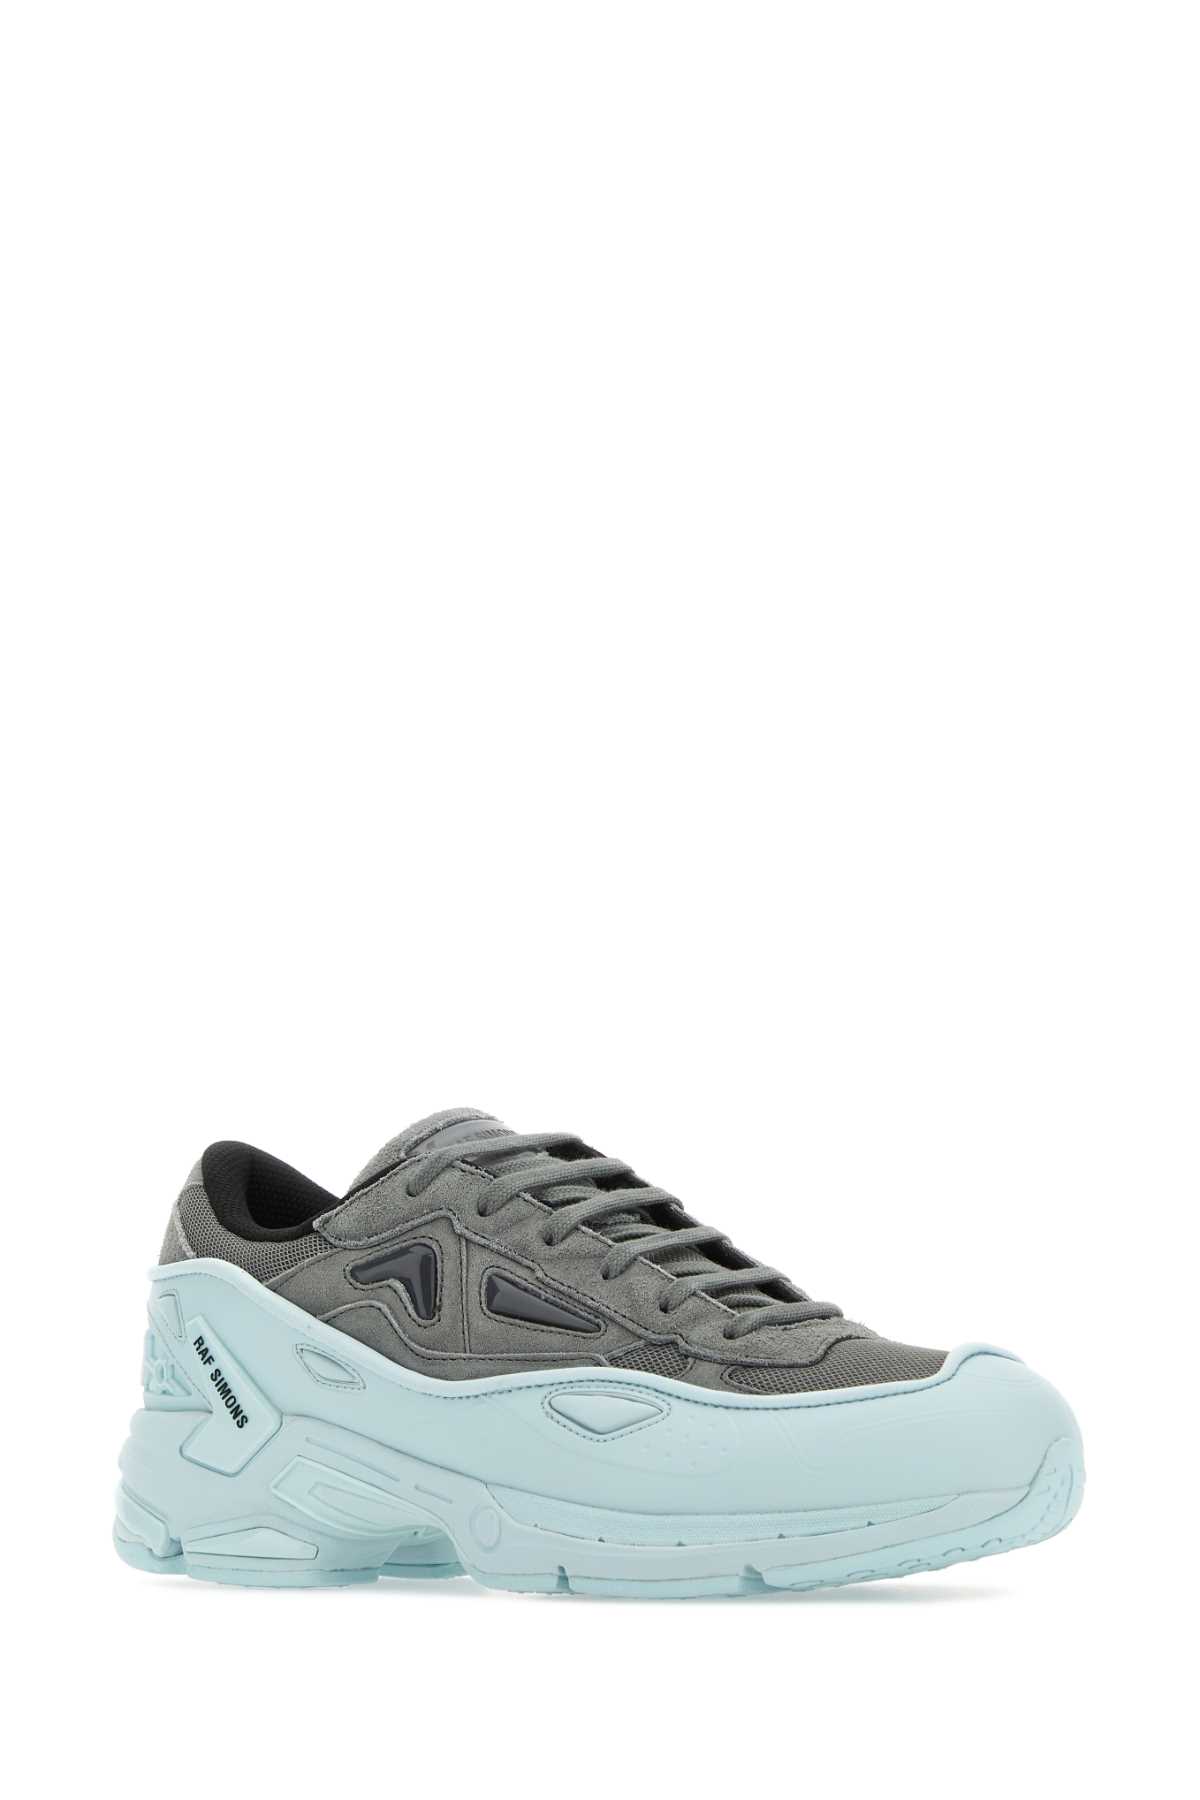 Raf Simons Two-tone Pharaxus Trainers In Greyquill